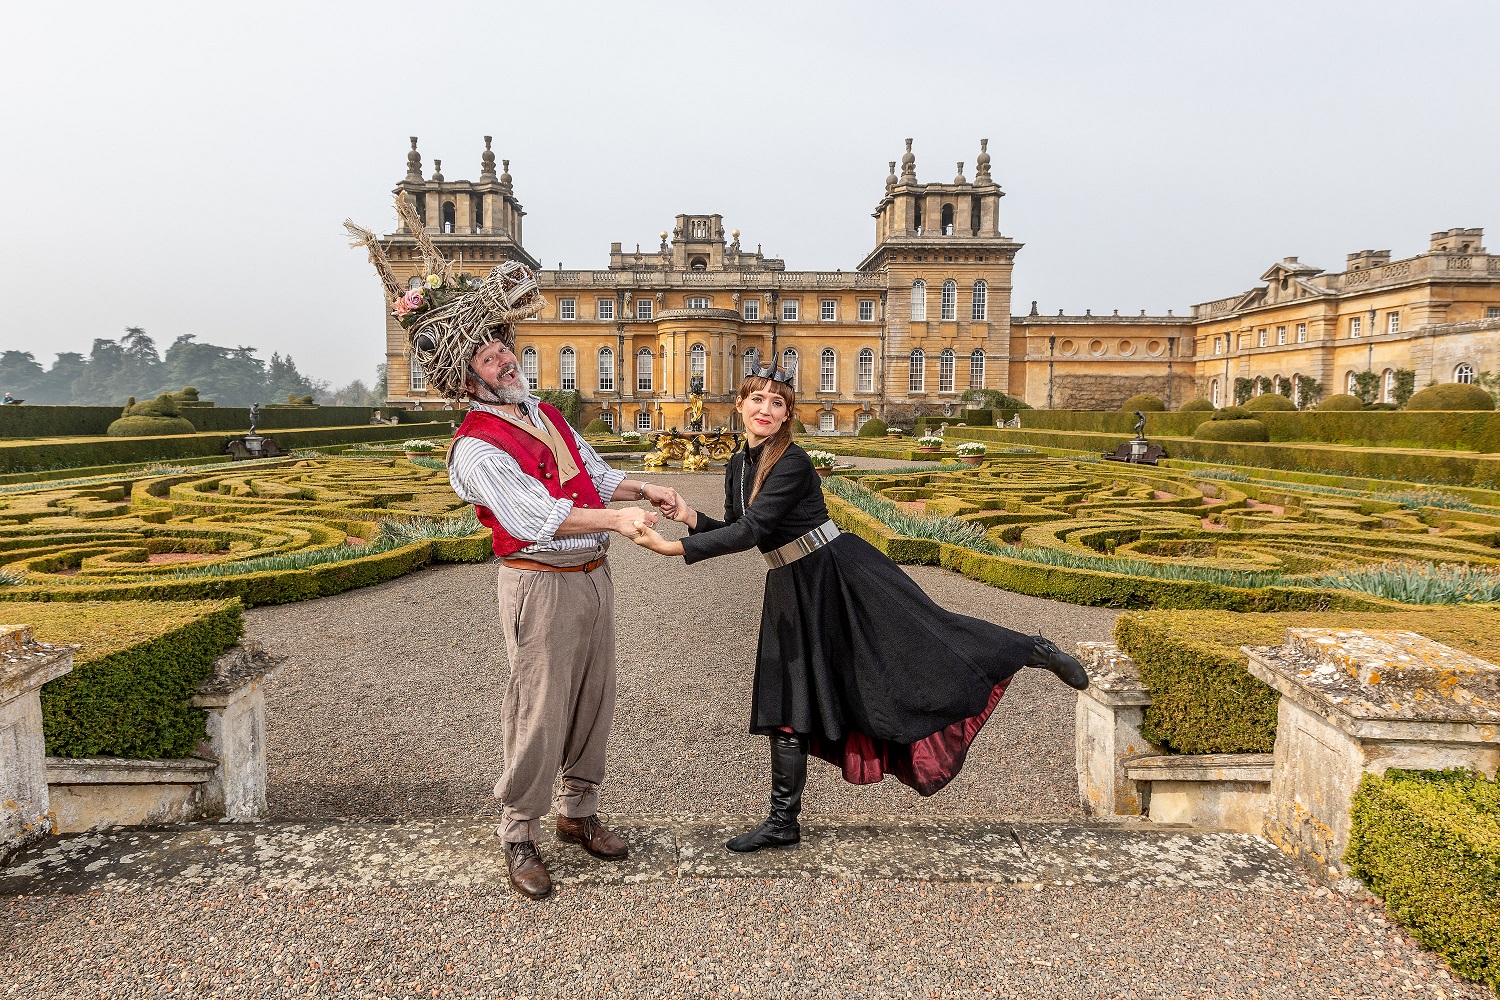 Thursday 18th April 2019 
Picture Credit Charlotte Graham 

Picture Shows Paul Hawkyard (Macduff/Bottom) Leandra Ashton (Lady Macbeth) in Various Locations at Blenheim Palace 

CREATIVE TEAM ANNOUNCED FOR BLENHEIM PALACEÕS
2019 SUMMER OF SHAKESPEARE
TICKETS NOW ON SALE
Blenheim Palace: 8 July Ð 7 September
[25 February] SHAKESPEAREÕS ROSE THEATRE, EuropeÕs first ever pop-up Shakespearean Theatre, today announces the creative team for its Blenheim Palace nine-week season, following a hugely successful inaugural run at its original site in York in 2018.
The 13-sided Elizabethan-style playhouse - complete with an Elizabethan village - will be constructed over a three- week period in the glorious grounds of ÔBritainÕs Greatest PalaceÕ where, in its Oxfordshire home, it will run from 8 July until 7 September, performing four of ShakespeareÕs greatest plays. The York season will return on 25th June and run until 1st September.
The Blenheim Palace company will be reviving the productions of A Midsummer NightÕs Dream and Macbeth as experienced in York last year as well as creating exciting new productions of Romeo & Juliet and Richard III. In York, SHAKESPEAREÕS ROSE THEATRE will be performing Hamlet, Henry V, The Tempest and Twelfth Night.
The plays have been selected from across the genres, offering something for everyone, and will be performed in repertory by two companies of actors based at each location, with casting to be announced.
Damian Cruden returns to SHAKESPEAREÕS ROSE THEATRE, having directed Macbeth last year in York. This year he will serve as overall artistic director for both companies. Tom Wright will be Associate Director for Macbeth and A Midsummer NightÕs Dream, and Juliet Forster, who was the original director of A Midsummer NightÕs Dream last year, will turn her skills to directing Romeo & Juliet this year. Amy Yardley will be associate scenic designer for both Macbeth and A Midsummer NightÕs Dream, and scenic designer for Romeo & Juliet. Sarah Mercade will be costume designer for Macbeth, A Midsummer NightÕs Dream and Romeo & Juliet. Lucy Pitman-Wallace will direct Richard III, which will have scenic and costume design by Adam Nee.
   
Originator of the project and CEO of international theatre company, Lunchbox Theatrical Productions, James Cundall MBE, said ÒWe are thrilled that Damian Cruden is once again joining us at SHAKESPEAREÕS ROSE THEATRE, this time as overall artistic director. With him we are delighted to have found a first-class team of directors and designers for our eight productions. We are looking forward to seeing their interpretations of these great plays.Ó
Dominic Hare, Chief Executive of Blenheim Palace, said ÒWhen I visited SHAKESPEAREÕS ROSE THEATRE in York last summer I was absolutely blown away, not only by the quality of the whole event, even down to the vintage carts and wagons, but by the extraordinary experience of seeing Shakespeare performed in such an intimate setting. It created the most astonishing connection between audience and actors, and produced some truly spine-tingling moments.
ÒI immediately thought it would be the ideal summer event for Blenheim Palace and I am immensely excited at the prospect of bringing these outstanding Shakespeare productions, as well as the Elizabethan experience, to such a stunning setting. We believe that SHAKESPEAREÕS ROSE THEATRE will bring many more visitors to the area for everyoneÕs benefit as well as being a marvellous cultural experience for local people.Ó
The Blenheim Palace season will be co-presented by Raymond Gubbay Ltd, who have a wealth of experience promoting events and concerts worldwide, including the popular ÔChristmas at Blenheim PalaceÕ illuminated trail and Cinderella experience.
Anthony Findlay, Chief Executive of Raymond Gubbay Ltd, said ÒWe have had the pleasure of working closely with Blenheim Palace for the past three years and have also enjoyed successful partnerships with Lunchbox Theatrical Productions on their touring shows. ItÕs hugely exciting that all three companies have now joined forces to bring this fabulous Shakespearean experience to the beautiful grounds of Blenheim Palace and the audiences of Oxfordshire and beyond.Ó
SHAKESPEAREÕS ROSE THEATRE and ShakespeareÕs Village are produced by Yorkshire-based Lunchbox Theatrical Productions. The Blenheim Palace season is presented in association with Raymond Gubbay Ltd and Blenheim Palace.
@ShakespearesRT
To book tickets at Blenheim Palace please visit : www.blenheimpalace.com/shakespearesRT
Blenheim Palace Listing Information
SHAKESPEAREÕS ROSE THEATRE Ð BLENHEIM PALACE
Blenheim Palace, Woodstock, Oxfordshire, OX20 1UL
Monday 8 July Ð Saturday 7 September 2019.
Macbeth, A Midsummer NightÕs Dream, Richard III, Romeo & Juliet
For full performance schedule please visit www.blenheimpalace.com/shakespearesRT Blenheim Palace Booking Information
Book online www.blenheimpalace.com/shakespearesRT
By phone 0115 9129107
Calls cost up to 13p per minute plus your phone companyÕs access charge.
In Person SHAKESPEAREÕS ROSE THEATRE, Blenheim Palace, Woodstock, Oxfordshire, OX20 1UL from 10am, Mon 8th July 2019
       
Tickets
All seats in SHAKESPEAREÕS ROSE THEATRE are the same Ð comfortably cushioned and backed, with plenty of leg room. Groundling tickets in the courtyard are open-air, all other seats are under cover. Visit blenheimpalace.com/shakespearesRT for seating plan and further details.
Premium £70.00
A Reserve £55.00
B Reserve £45.00
C Reserve £35.00
D Reserve £25.00 (restricted view) Groundlings £15.00
Wheelchairs - Courtyard £15.00, Premium £70.00. Each wheelchair space includes carer seat free of charge. Children (16 and under) £3 off all seats, £2 off Groundlings.
Groups of 16+ receive 10% off all ticket types (excluding groundlings). Contact SEE groups on 0844 412 4650 or by emailing groups@seetickets.com
Schools Ð Eight morning performances have been set aside exclusively for schools at £10 per ticket anywhere in the theatre. 1 teacher goes free with every 10 children. Tickets available through SEE Tickets on 0800 852 7244 or by emailing education@seetickets.com.
There is up to 15% off when purchasing Ôcombined ticketsÕ.
Prices inclusive of booking fee. All transactions are subject to a single charge of £2 for print at home tickets and collections or £2.50 for postal orders.
For more information on SHAKESPEAREÕS ROSE THEATRE please visit: www.shakespearesrosetheatre.com NOTES TO EDITORS
About Lunchbox Theatrical Productions
Lunchbox Theatrical Productions, founded in 1992 by James Cundall, has established an unrivalled reputation for producing top quality international entertainment in the United Kingdom, Australia, New Zealand, Hong Kong, Singapore, The Philippines, Europe and South Africa.
Producing West End and Broadway musicals, plays, boutique shows, spectaculars, concerts, childrenÕs shows, ice shows and events across five continents, Lunchbox Theatrical Productions sells over one million visitor experiences per year.
In addition, from the companyÕs UK headquarters, Lunchbox Theatrical Productions has been delivering events in the York region for over 13 years. This includes the award-winning YorkshireÕs Winter Wonderland incorporating The Ice Factor; productions by The Imperial Ice StarsÕ at Castle Howard, Royal Albert Hall, Chatsworth House and Hyde Park Winter Wonderland; THORÕS tipi bars in York, Leeds, Sheffield, Lincoln, LondonÕs Hyde Park Winter Wonderland and Brighton; the Vintage Fun Fair in York City Centre; and Christmas at York Museum Gardens. In 2018, the company created SHAKESPEAREÕS ROSE THEATRE in York, which this year returns to York and makes its debut at Blenheim Palace.
About Blenheim Palace
A visit to Blenheim Palace offers an unforgettable experience. ItÕs a chance to share the splendours of Baroque architecture, to wonder at the collections of art, tapestry and antiques, and to explore the Park and Gardens and discover landscapes crafted by Lancelot ÔCapabilityÕ Brown.
Whether enjoying a day visit to this magnificent home to the Dukes of Marlborough and birthplace of Sir Winston Churchill, or as a regular visitor able to appreciate the changing seasons and an annual programme of historical and cultural events, you will be sure to feel enriched by the Blenheim Palace experience.
      
Blenheim Palace - BritainÕs Greatest Palace.
About Raymond Gubbay Ltd
Founded in 1966, Raymond Gubbay Ltd is recognised as being at the forefront for promoting and producing popular classical music, opera, ballet and major events worldwide. In partnership with world class venues, including Blenheim Palace, Forestry Commission England, National Trust, Royal Botanic Garden Edinburgh and Royal Botanic Gardens, Kew, RGL Ltd regularly produce Christmas light trails around the UK and Europe. Additionally, the company annually presents over 500 concerts. raymondgubbay.co.uk
For further information and interviews please contact:
Rebecca Byers |Rebecca.Byers@target-live.co.uk | 020 7052 1301
Arabella Neville-Rolfe | Arabella.Neville-Rolfe@target-live.co.uk |020 7052 1301 www.target-live.co.uk